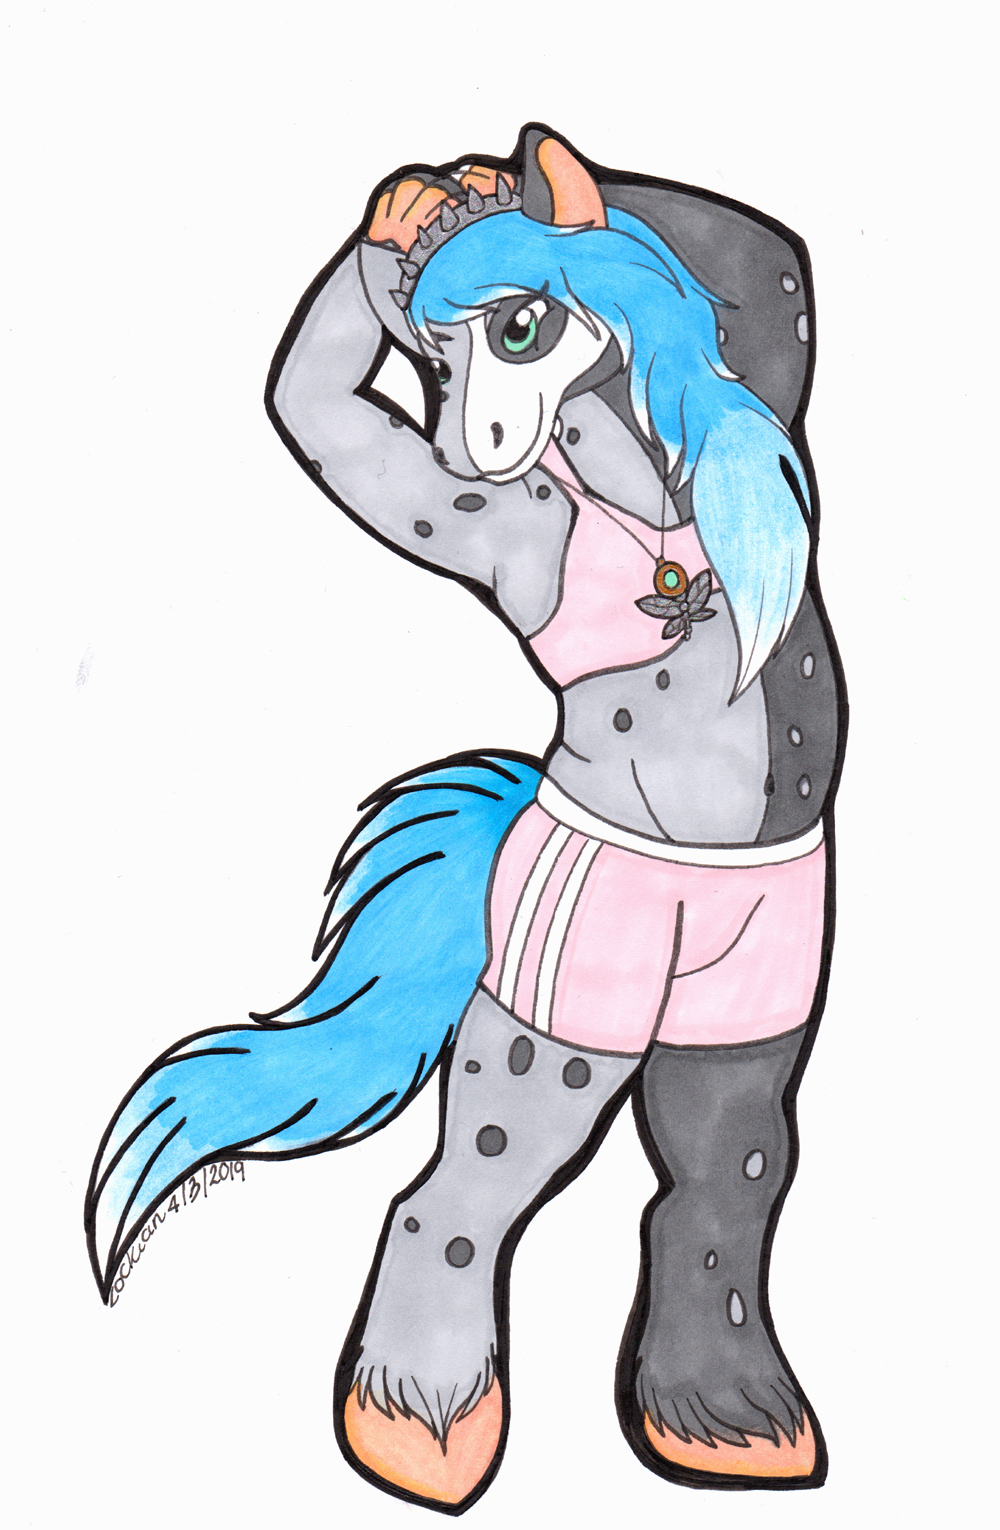 Most recent image: Fitness Horse - For Mimik!